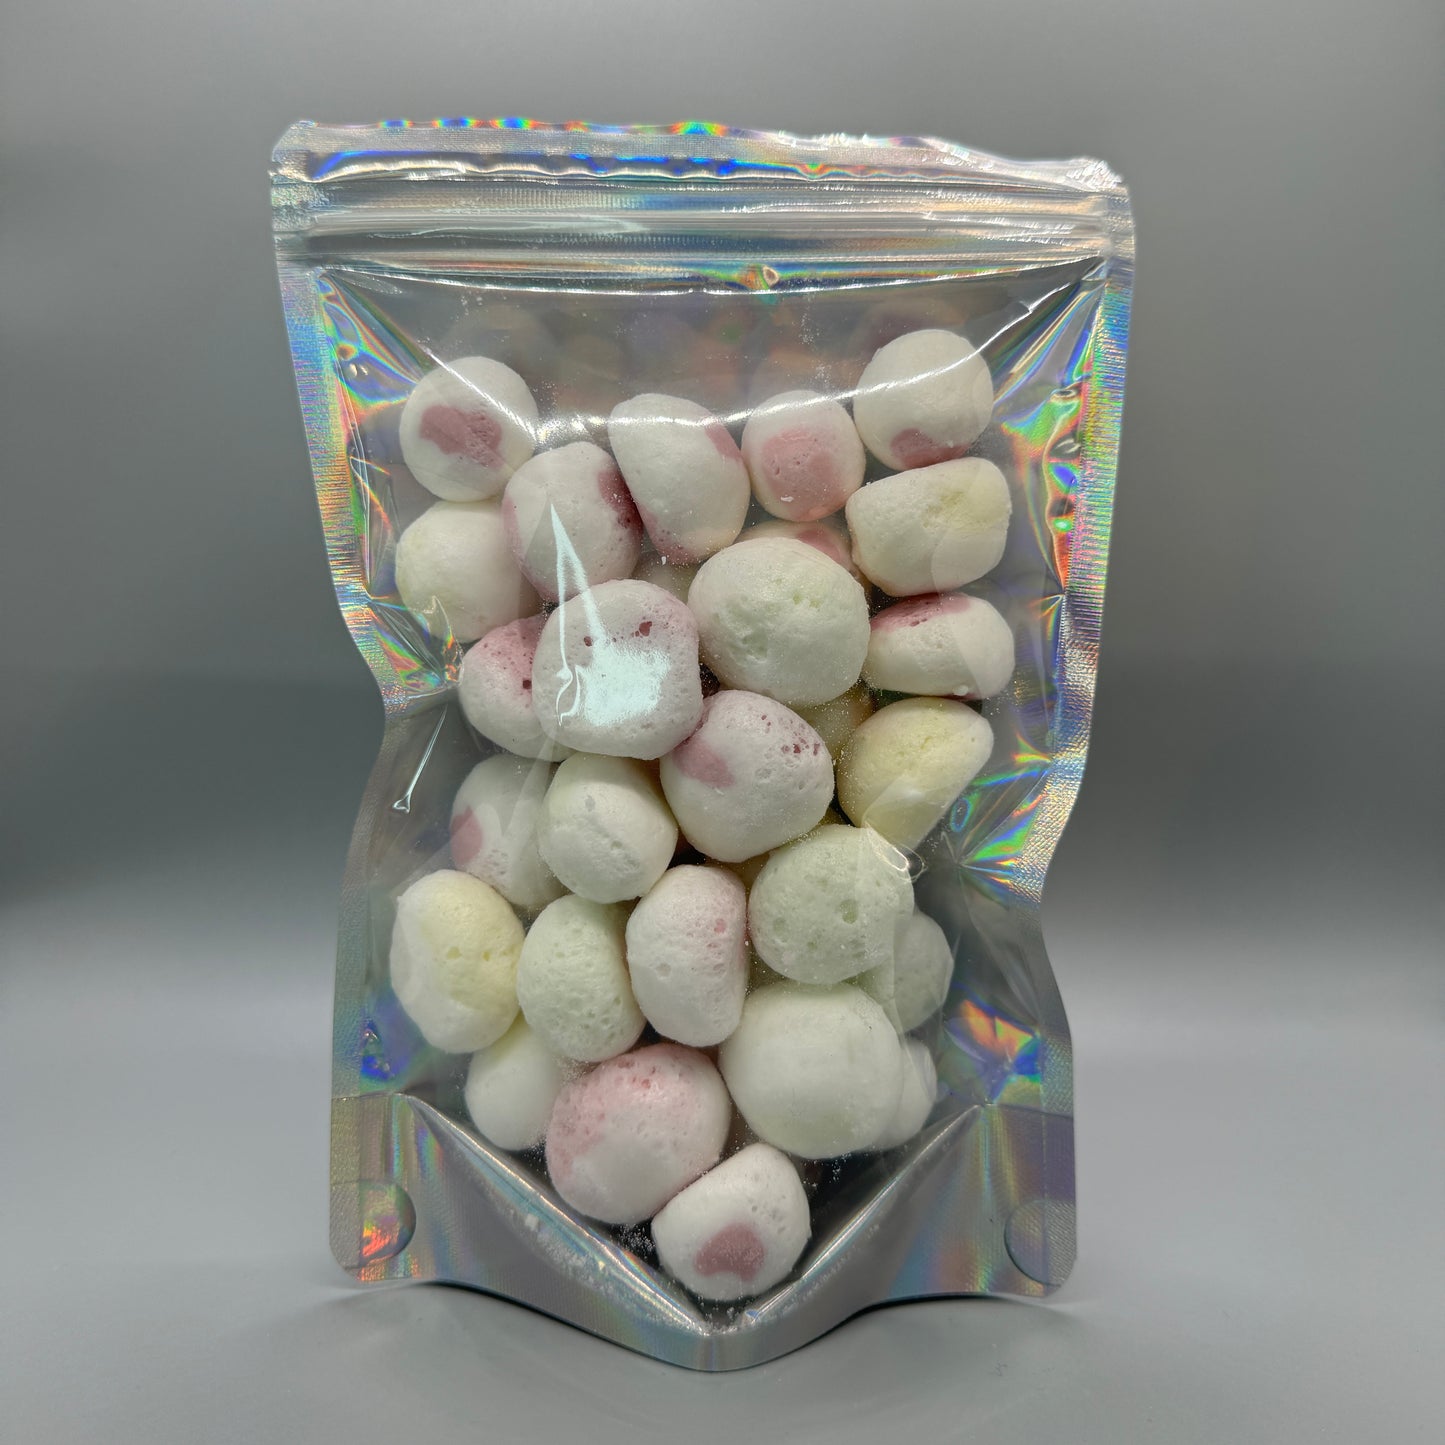 Freeze Dried Candy | Low-Chomp - Squee Prints